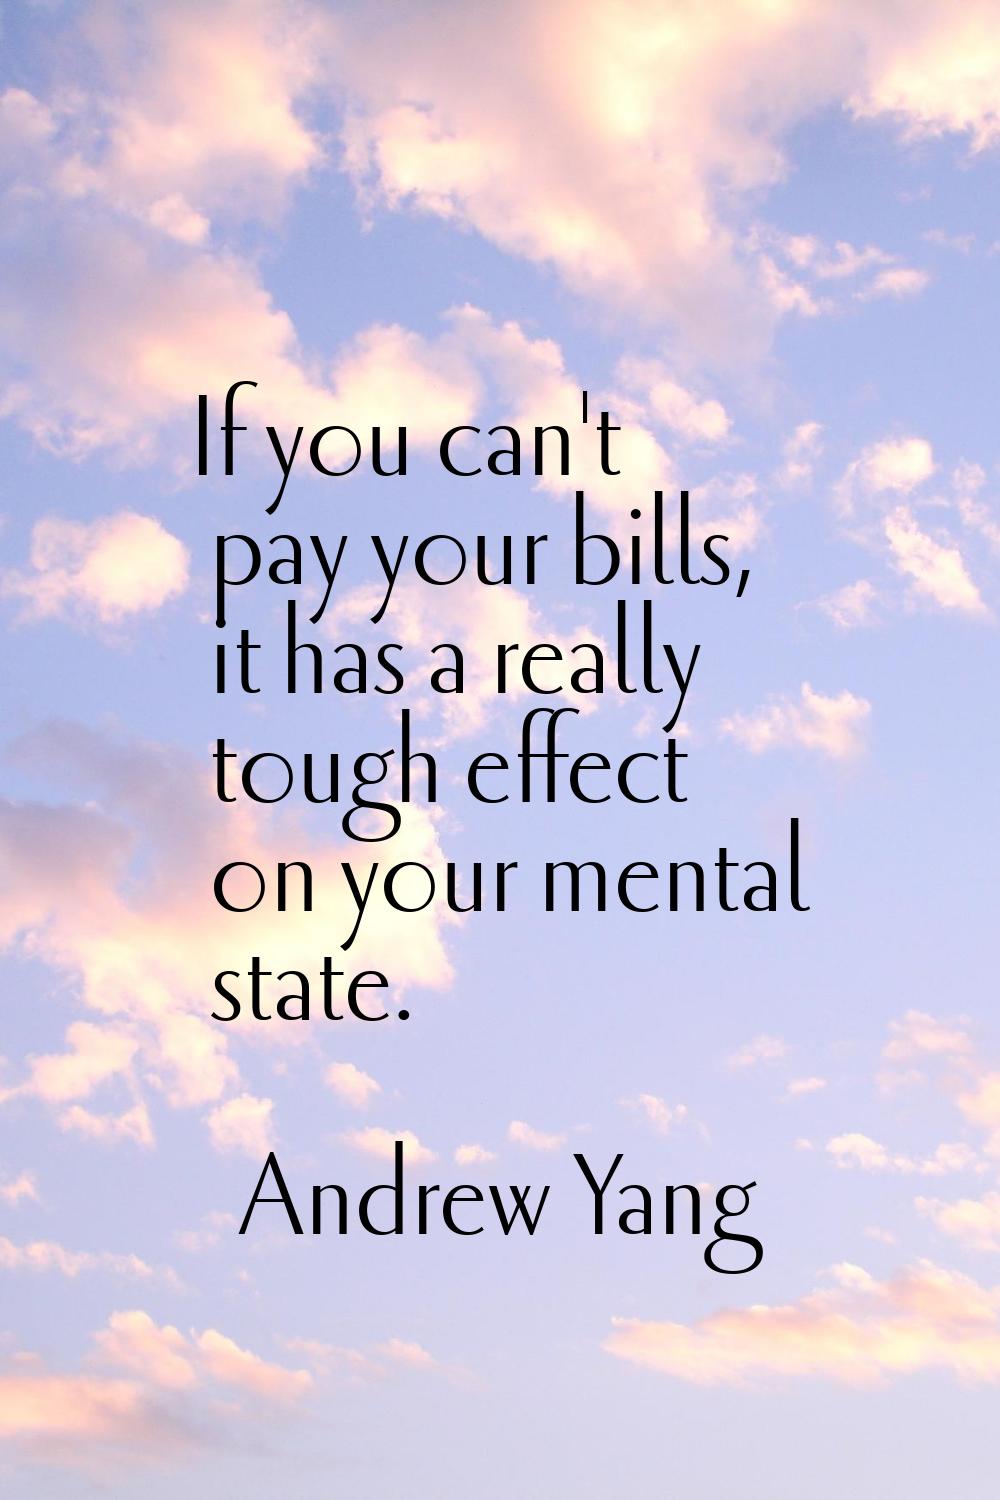 If you can't pay your bills, it has a really tough effect on your mental state.